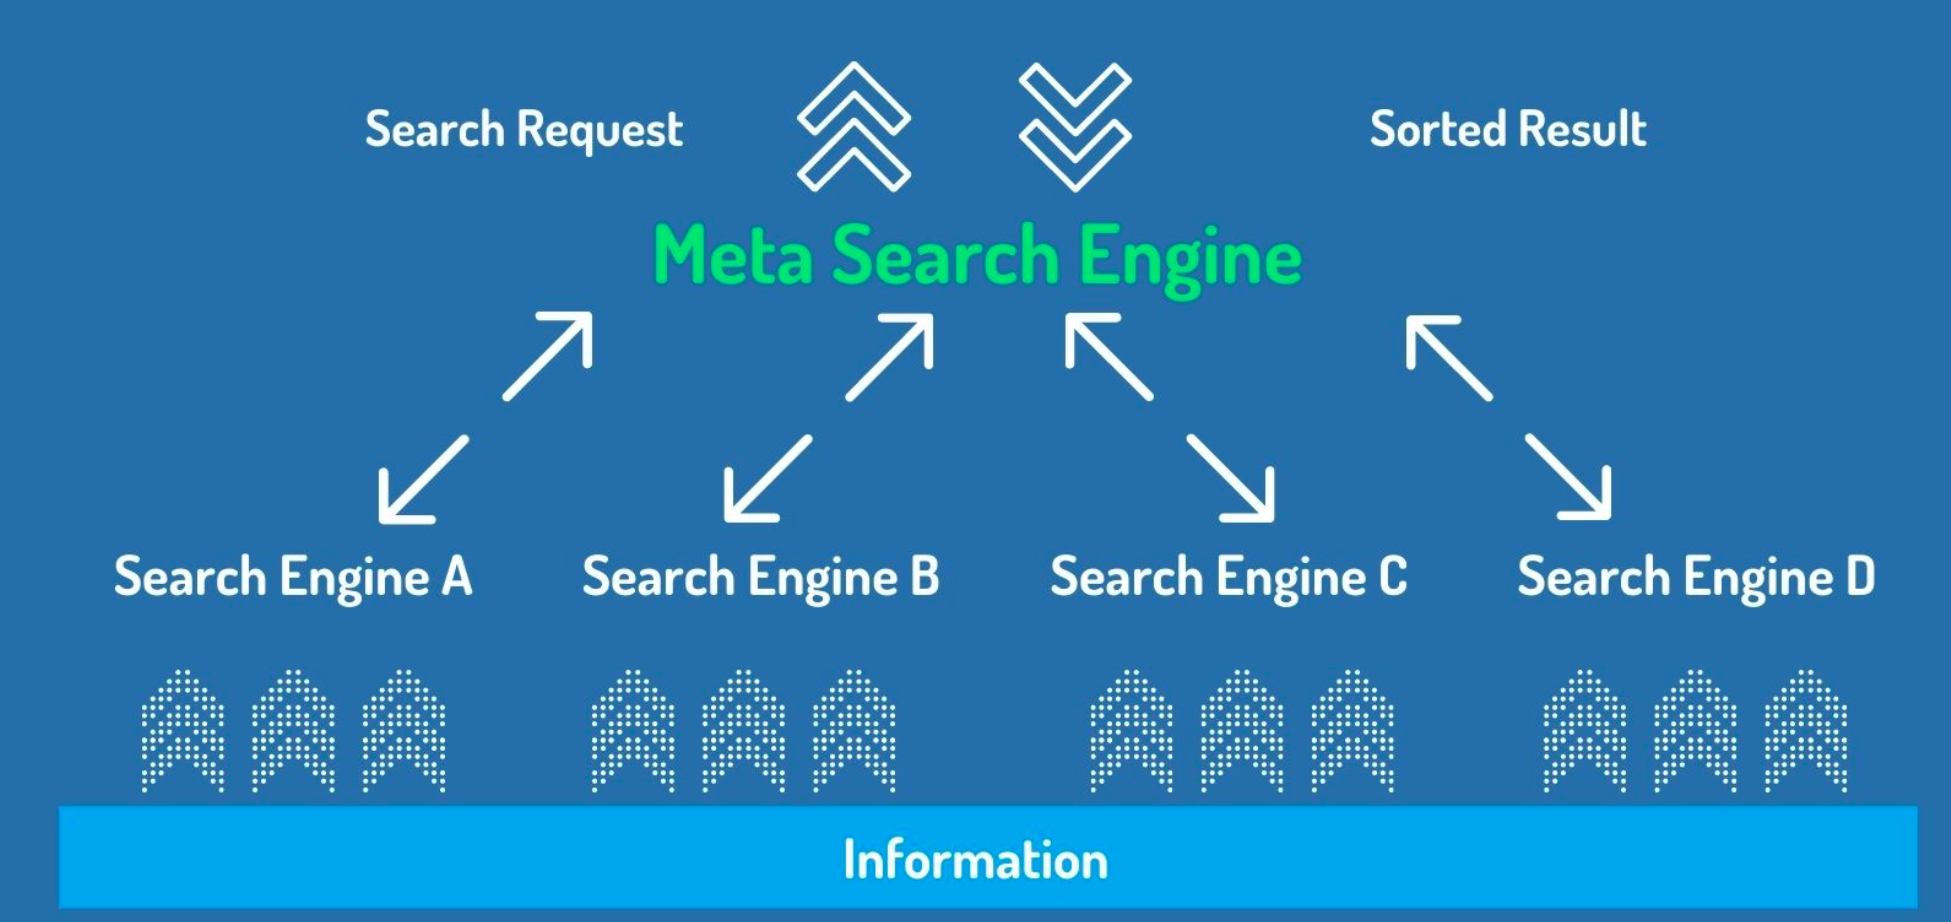 Differences Between Meta Search Engines and Regular Search Engines